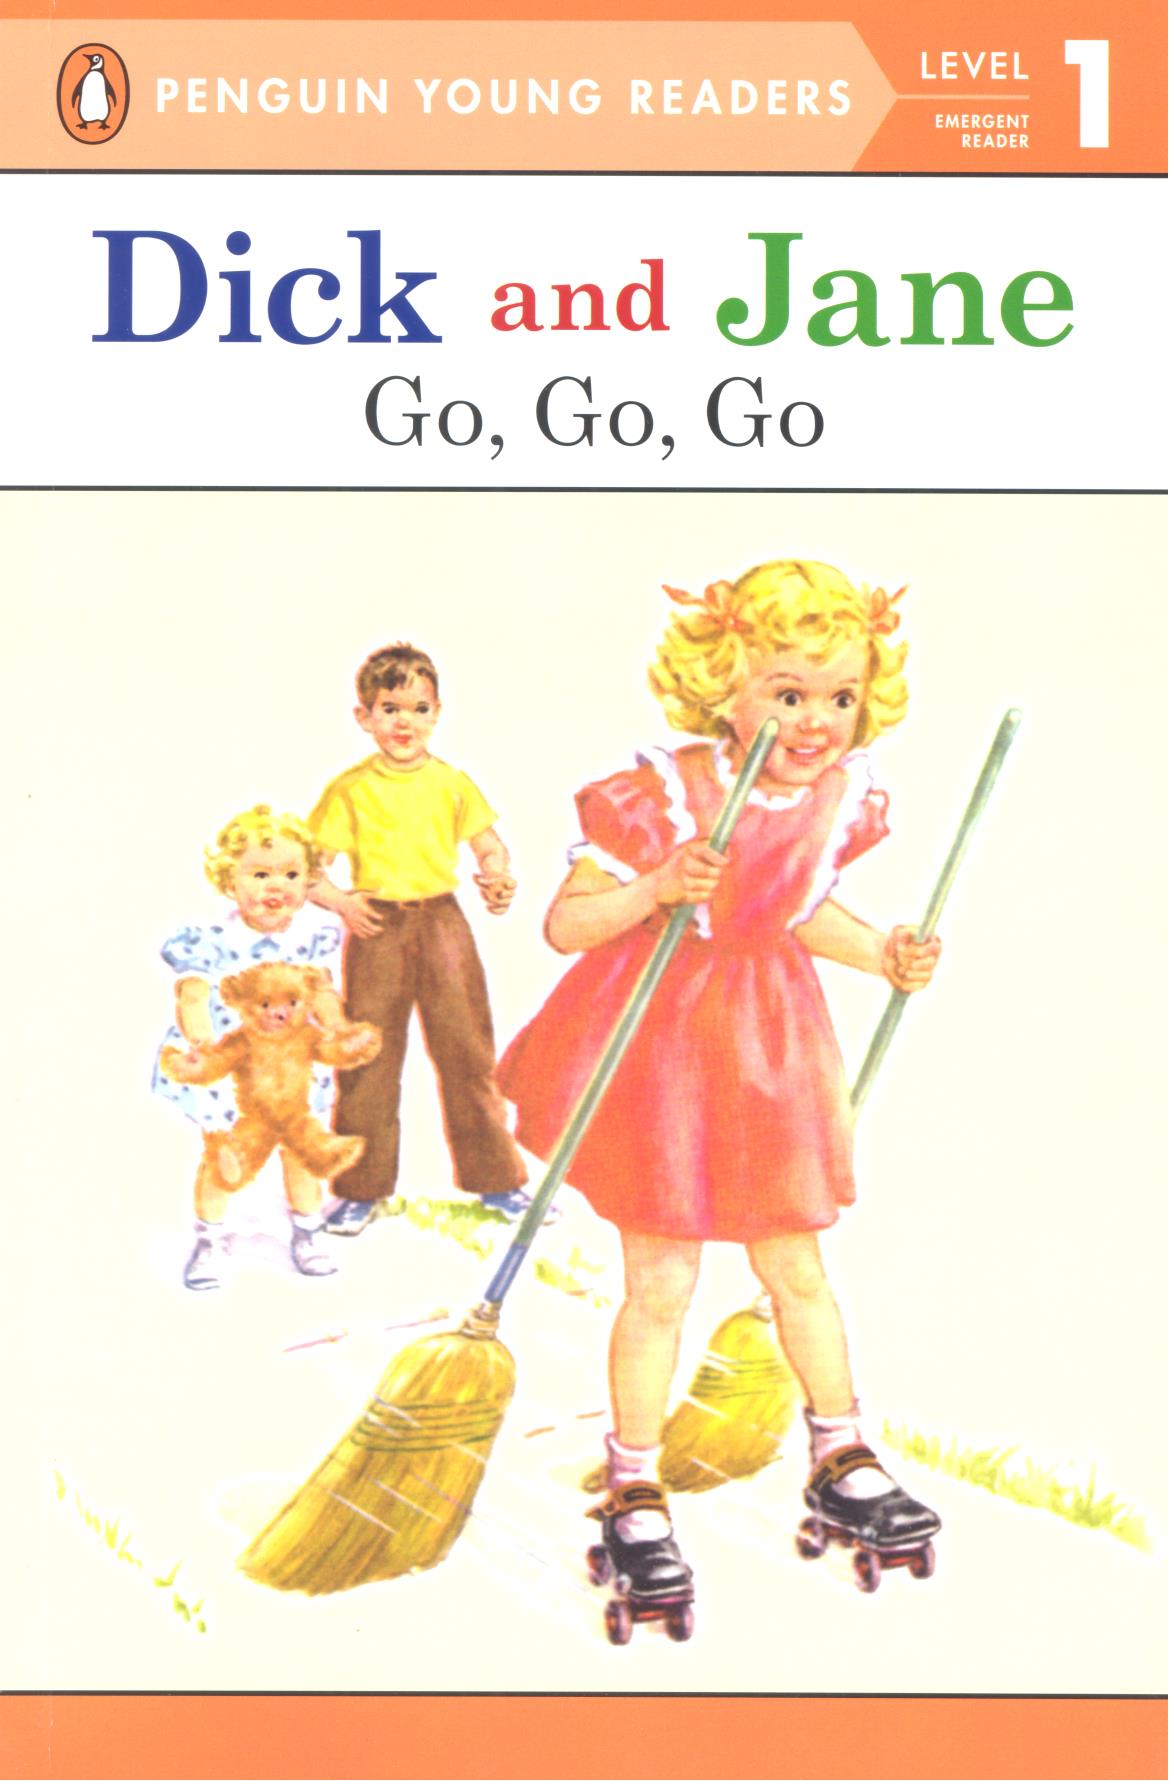 Dick and Jane: Go, Go, Go